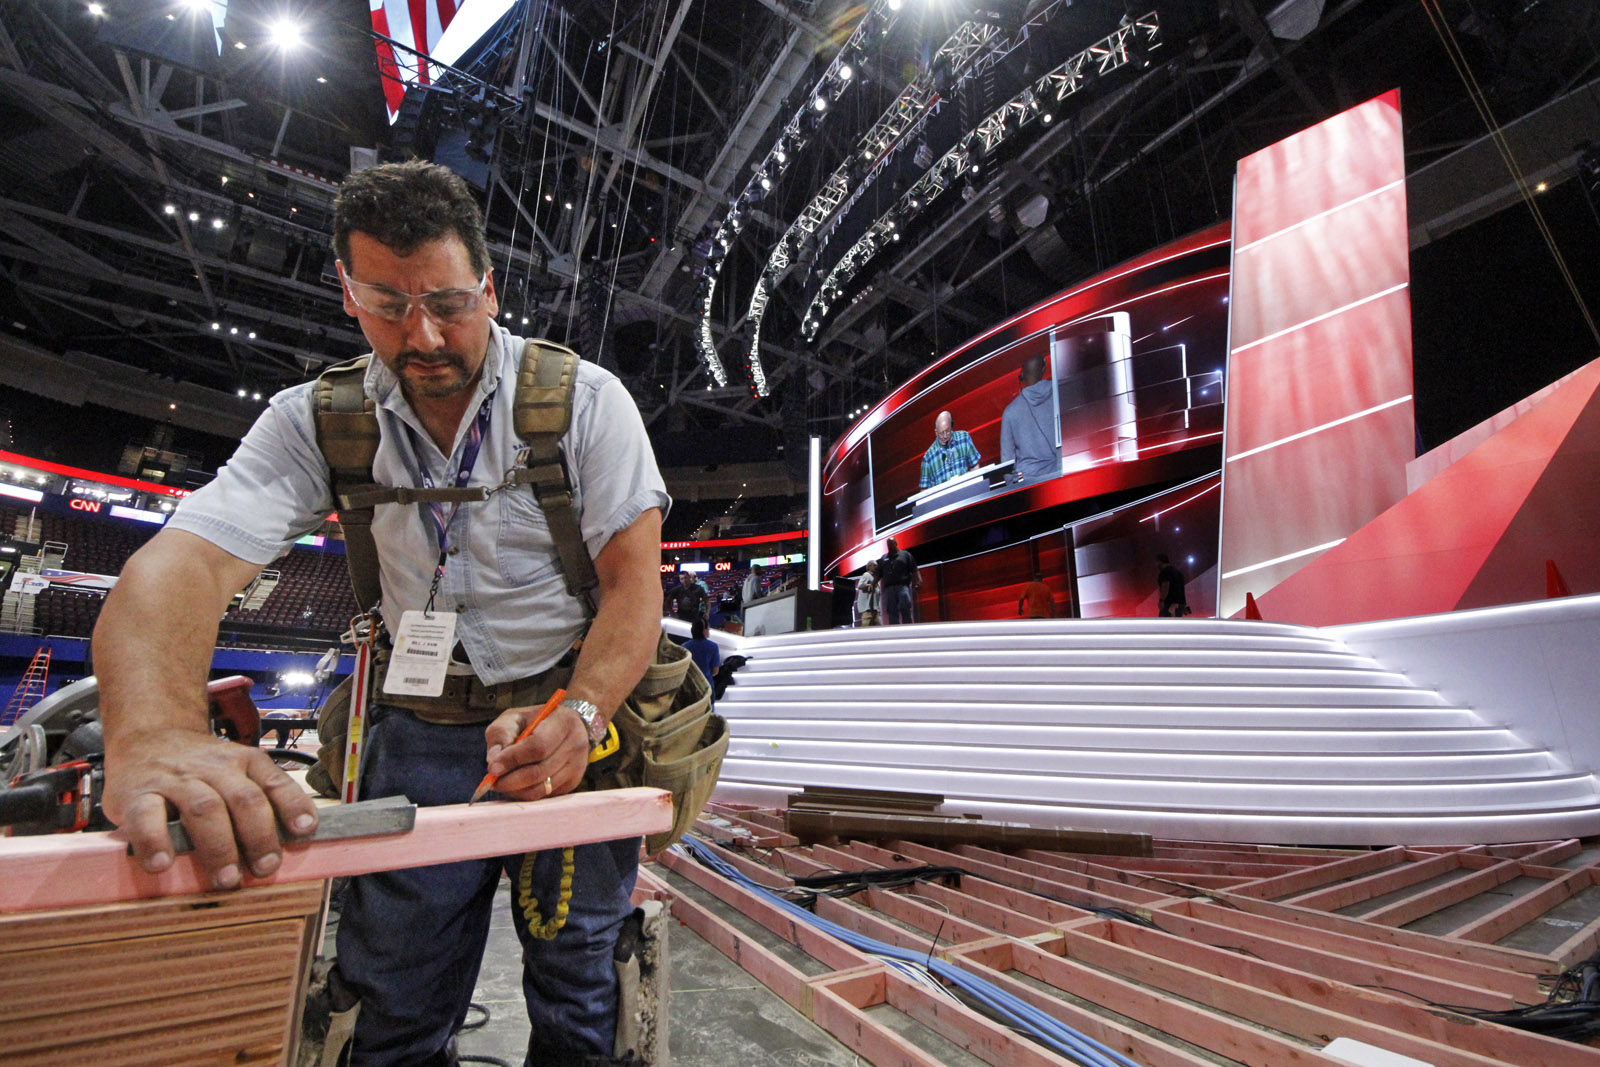 Carpenter Bill Kaim of Cleveland, works on the convention floor at the Quicken Loans Arena in downtown Cleveland, Ohio, in preparation for the upcoming Republican National Convention Wednesday, July 13, 2016. (AP Photo/Gene J. Puskar)